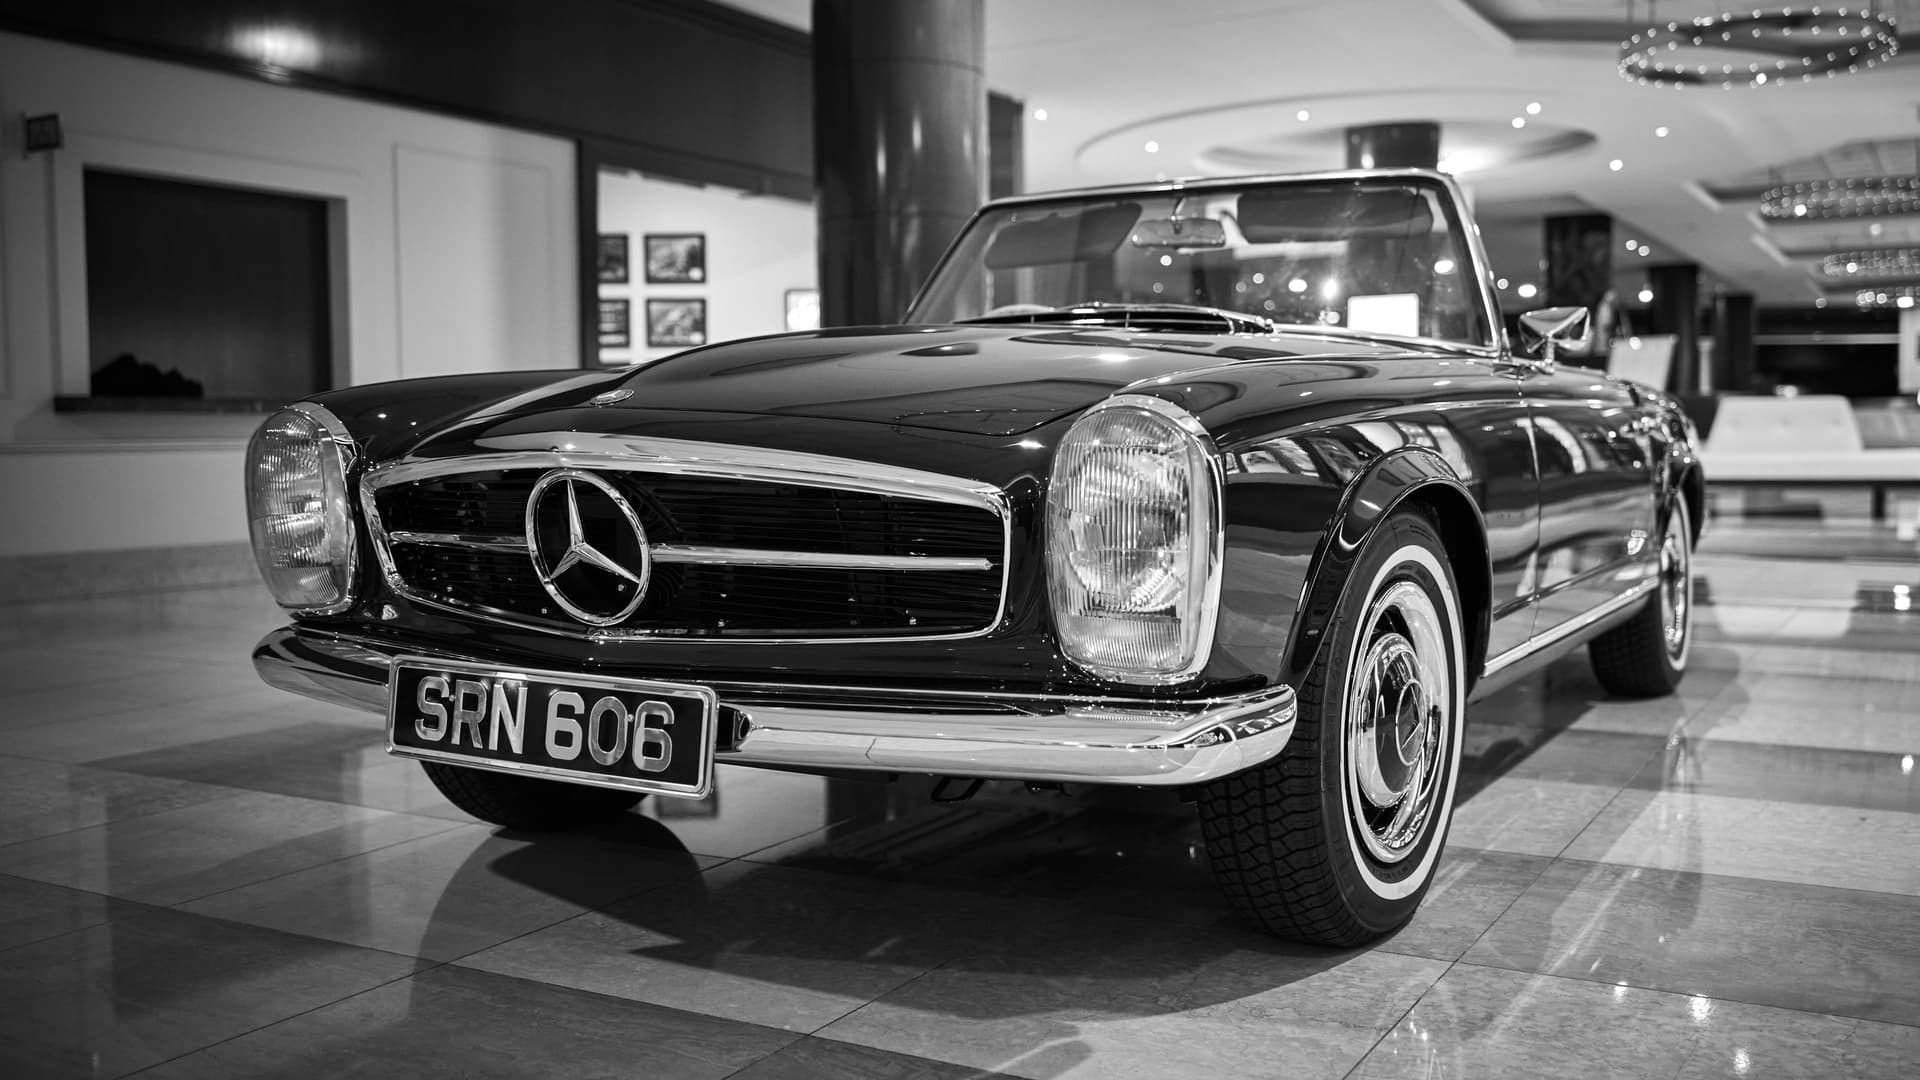 w113, mercedes sl, mercedes-benz, daimler, mercedes pagoda, sl-class, mercedes-benz, mercedes, sl-class, ev, electric vehicles, everrati, modified, tuned, aftermarket, gorgeous w113 mercedes-benz sl pagoda has been completely electrified by everrati